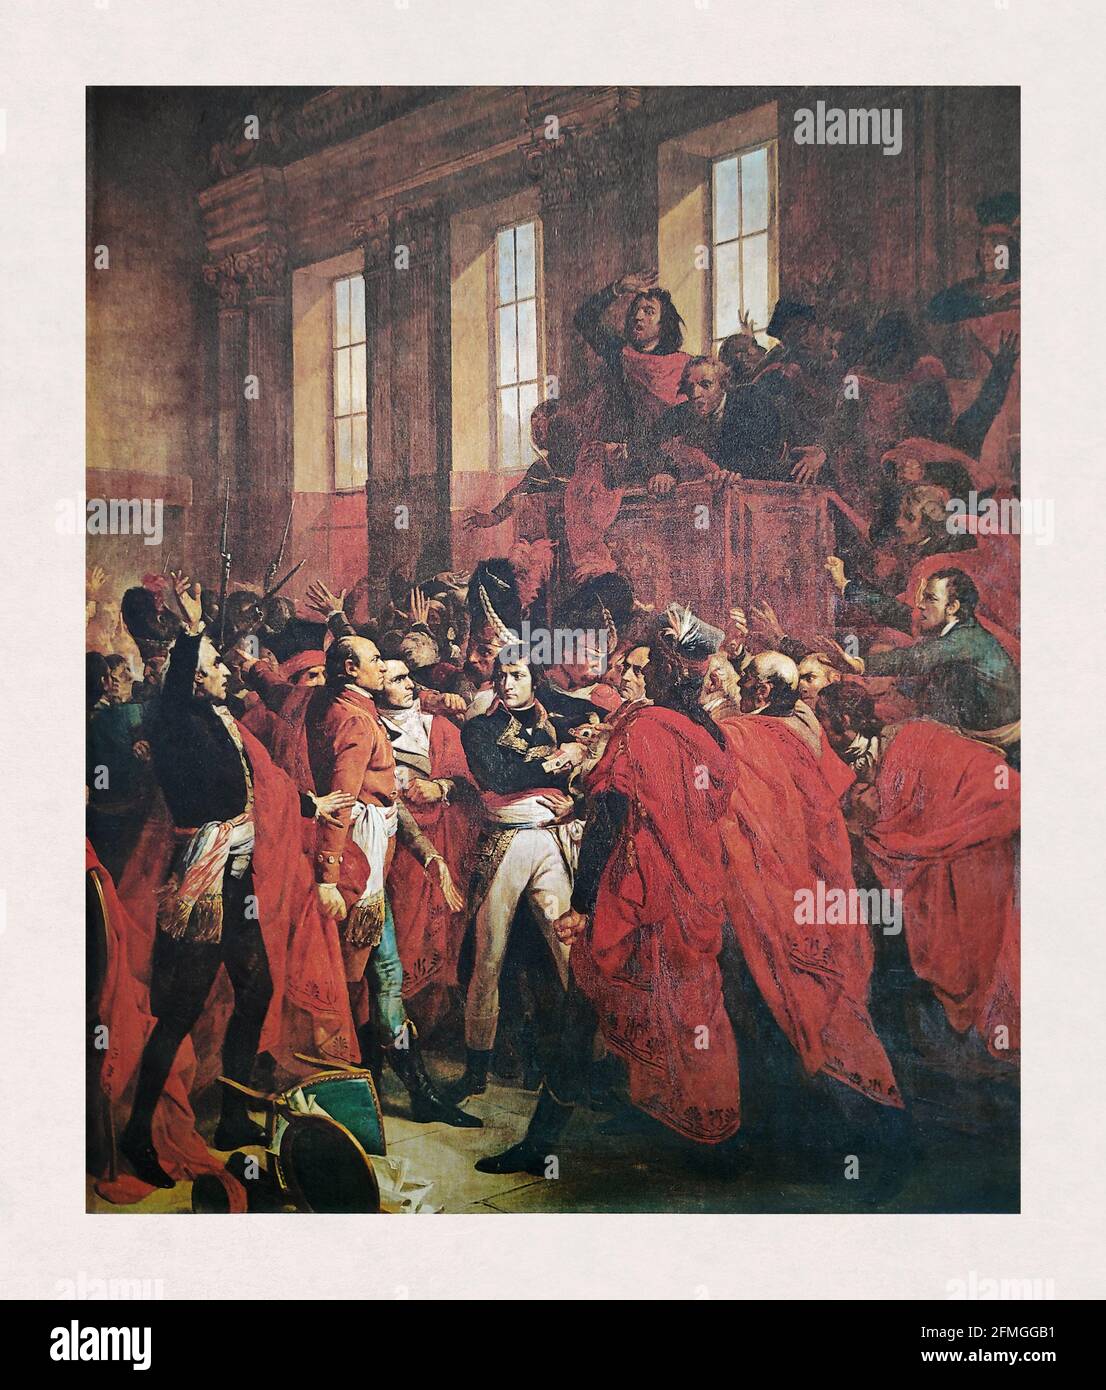 Painting made in 1840 by Bouchot representing General Bonaparte at the Council of the Five Hundred in Saint-Cloud on November 10, 1799. Stock Photo